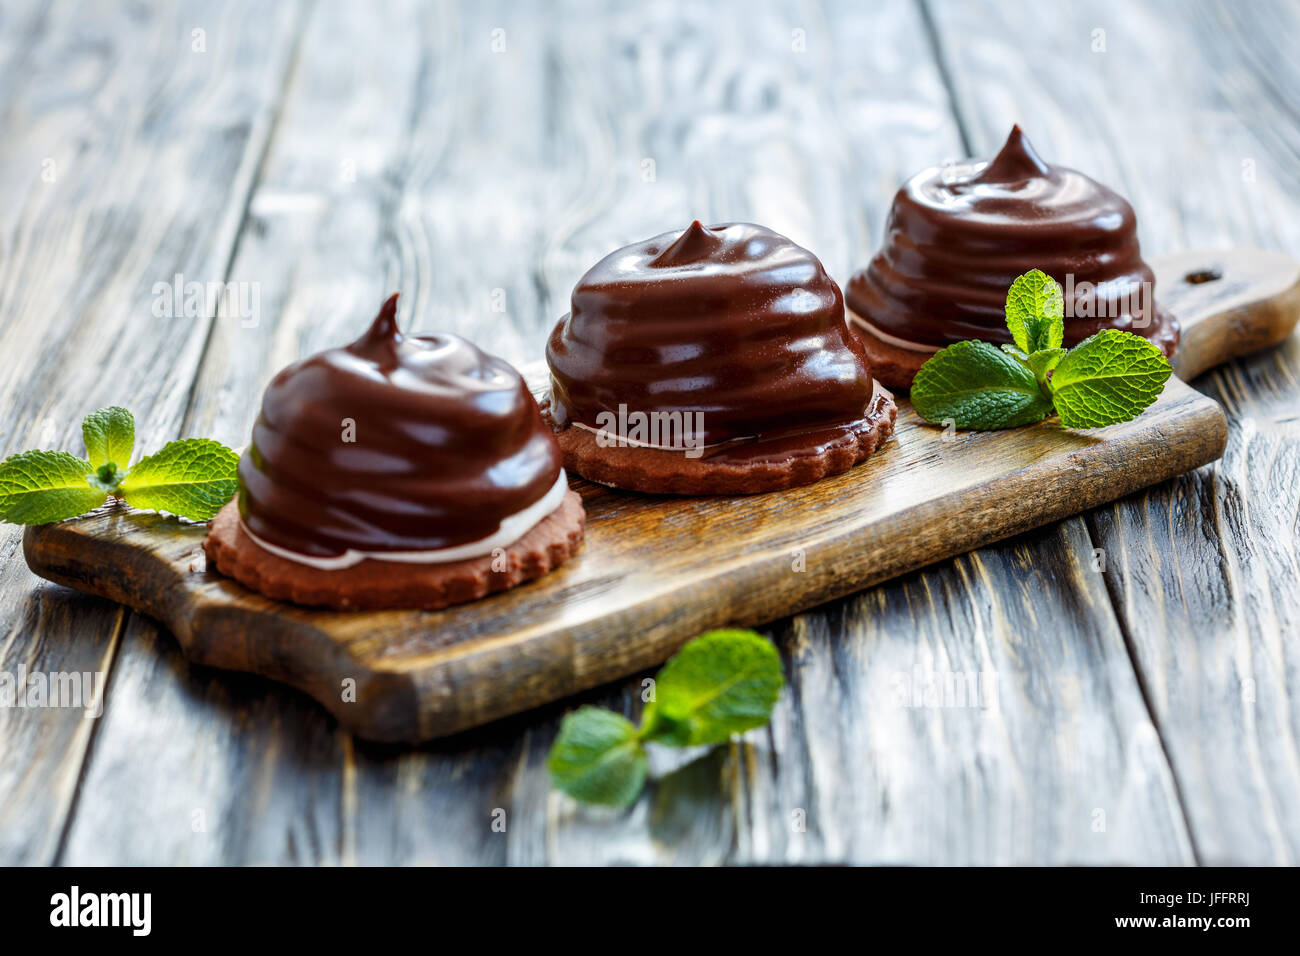 Cakes with souffle in chocolate glaze. Stock Photo